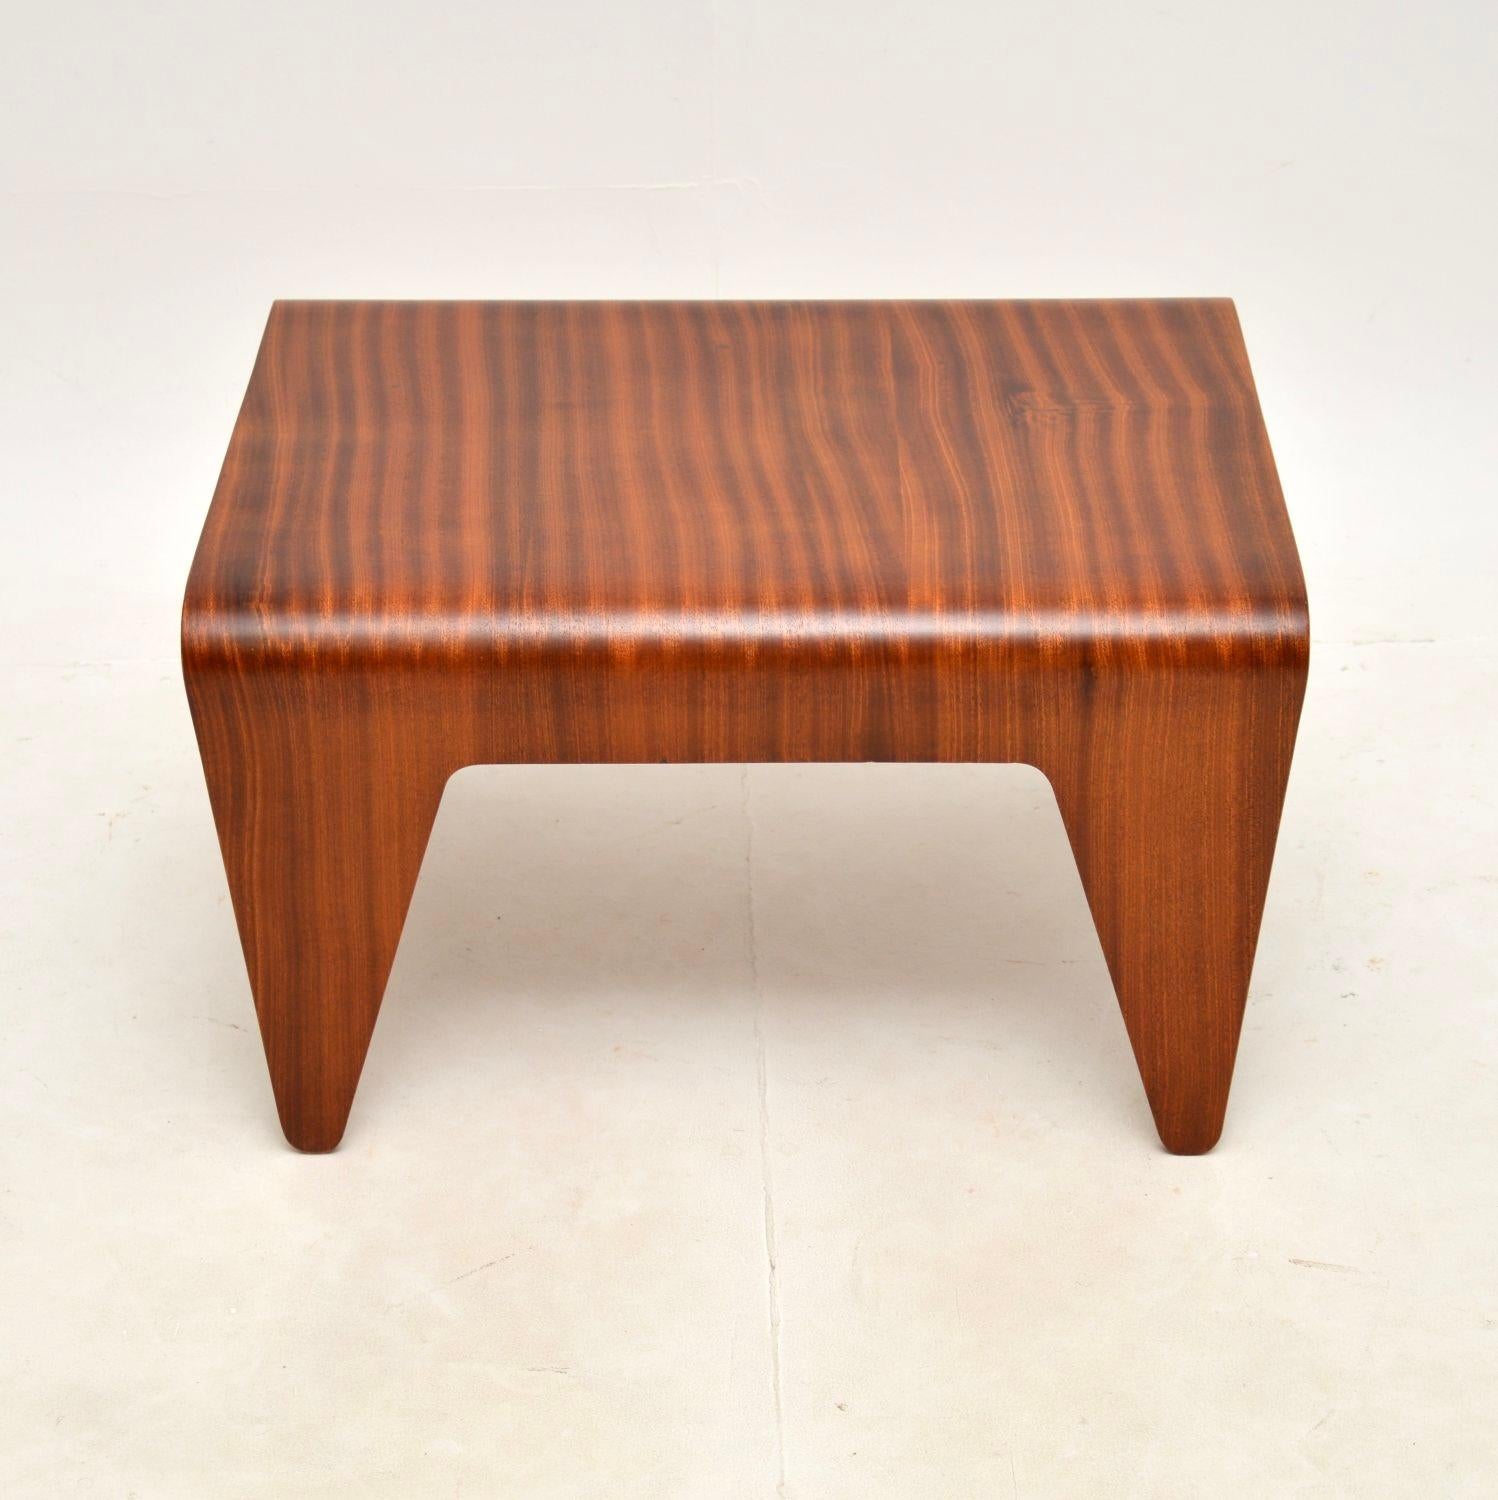 Mid-20th Century Vintage Laminated Plywood Side Table by Marcel Breuer for Isokon For Sale